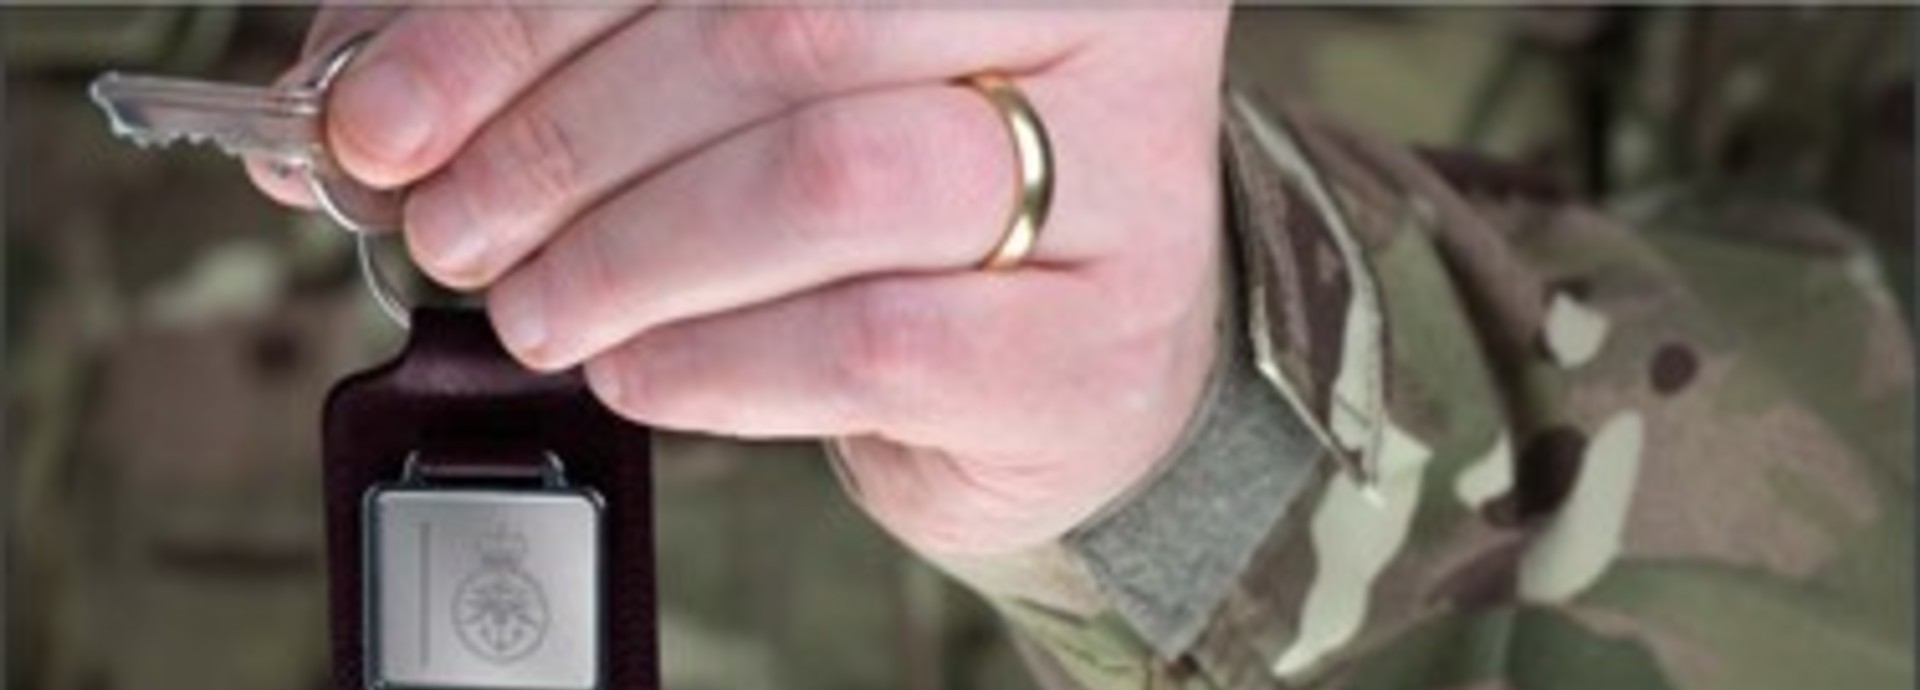 Hand of person in military uniform holding a key up